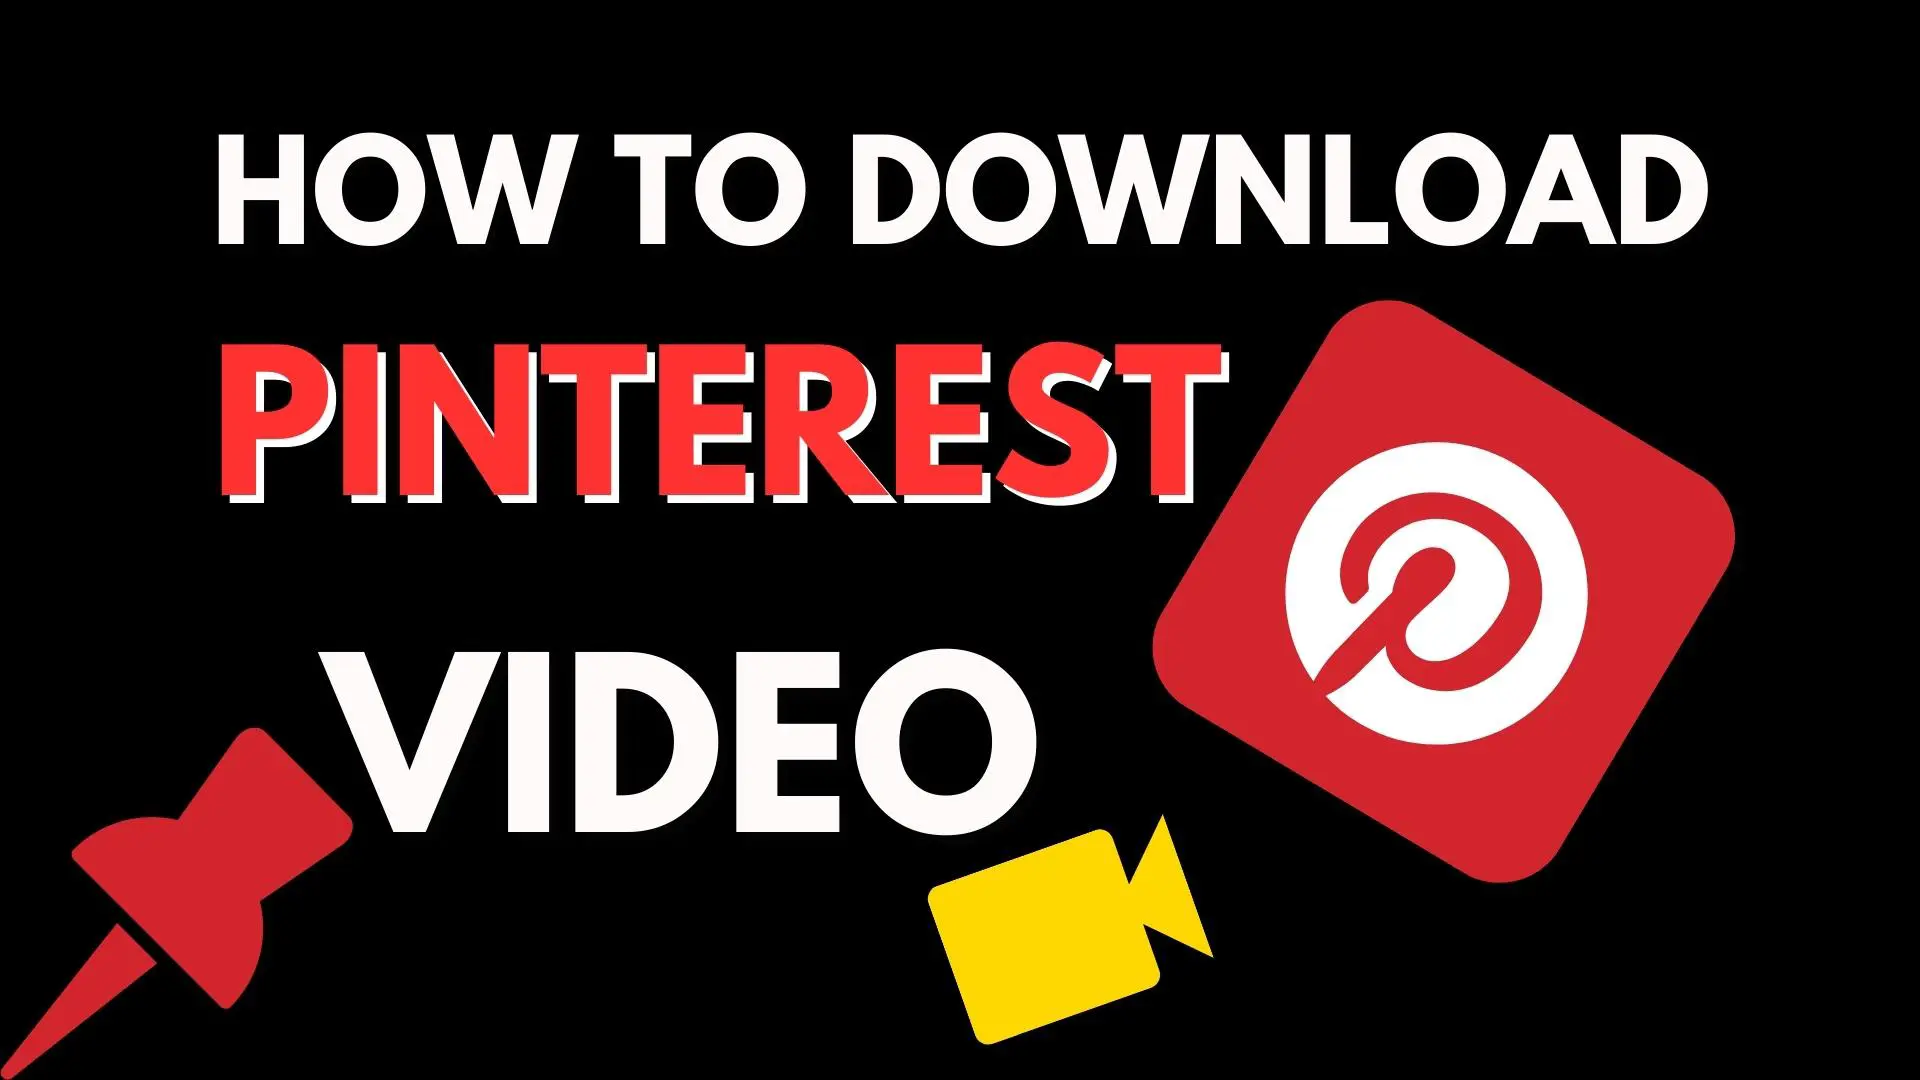 How to Download Pinterest Videos: Your Ultimate Guide